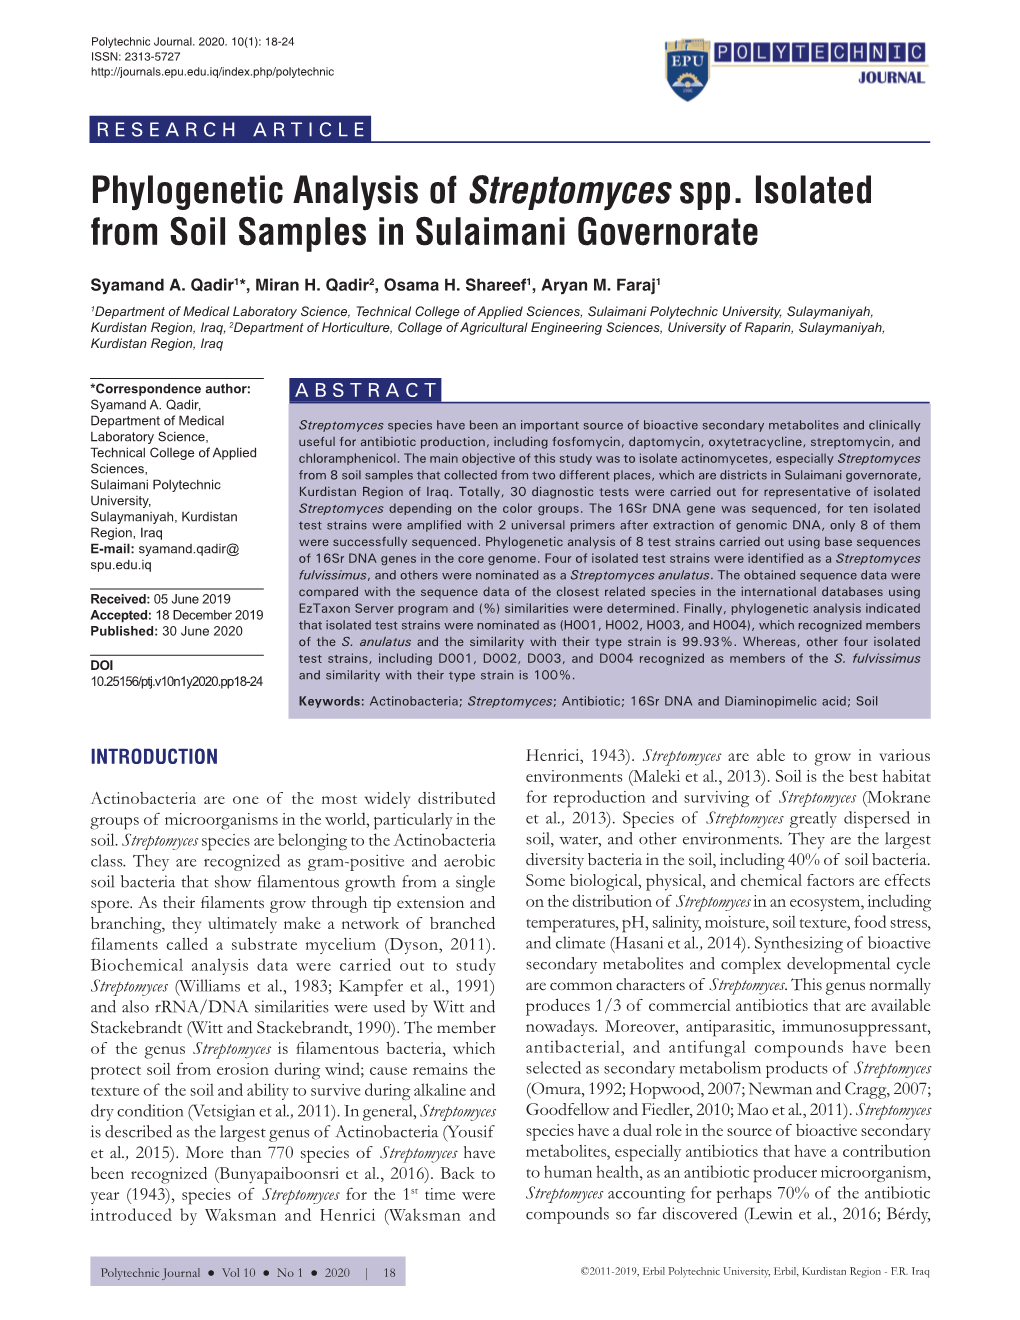 Phylogenetic Analysis of Streptomyces Spp. Isolated from Soil Samples in Sulaimani Governorate